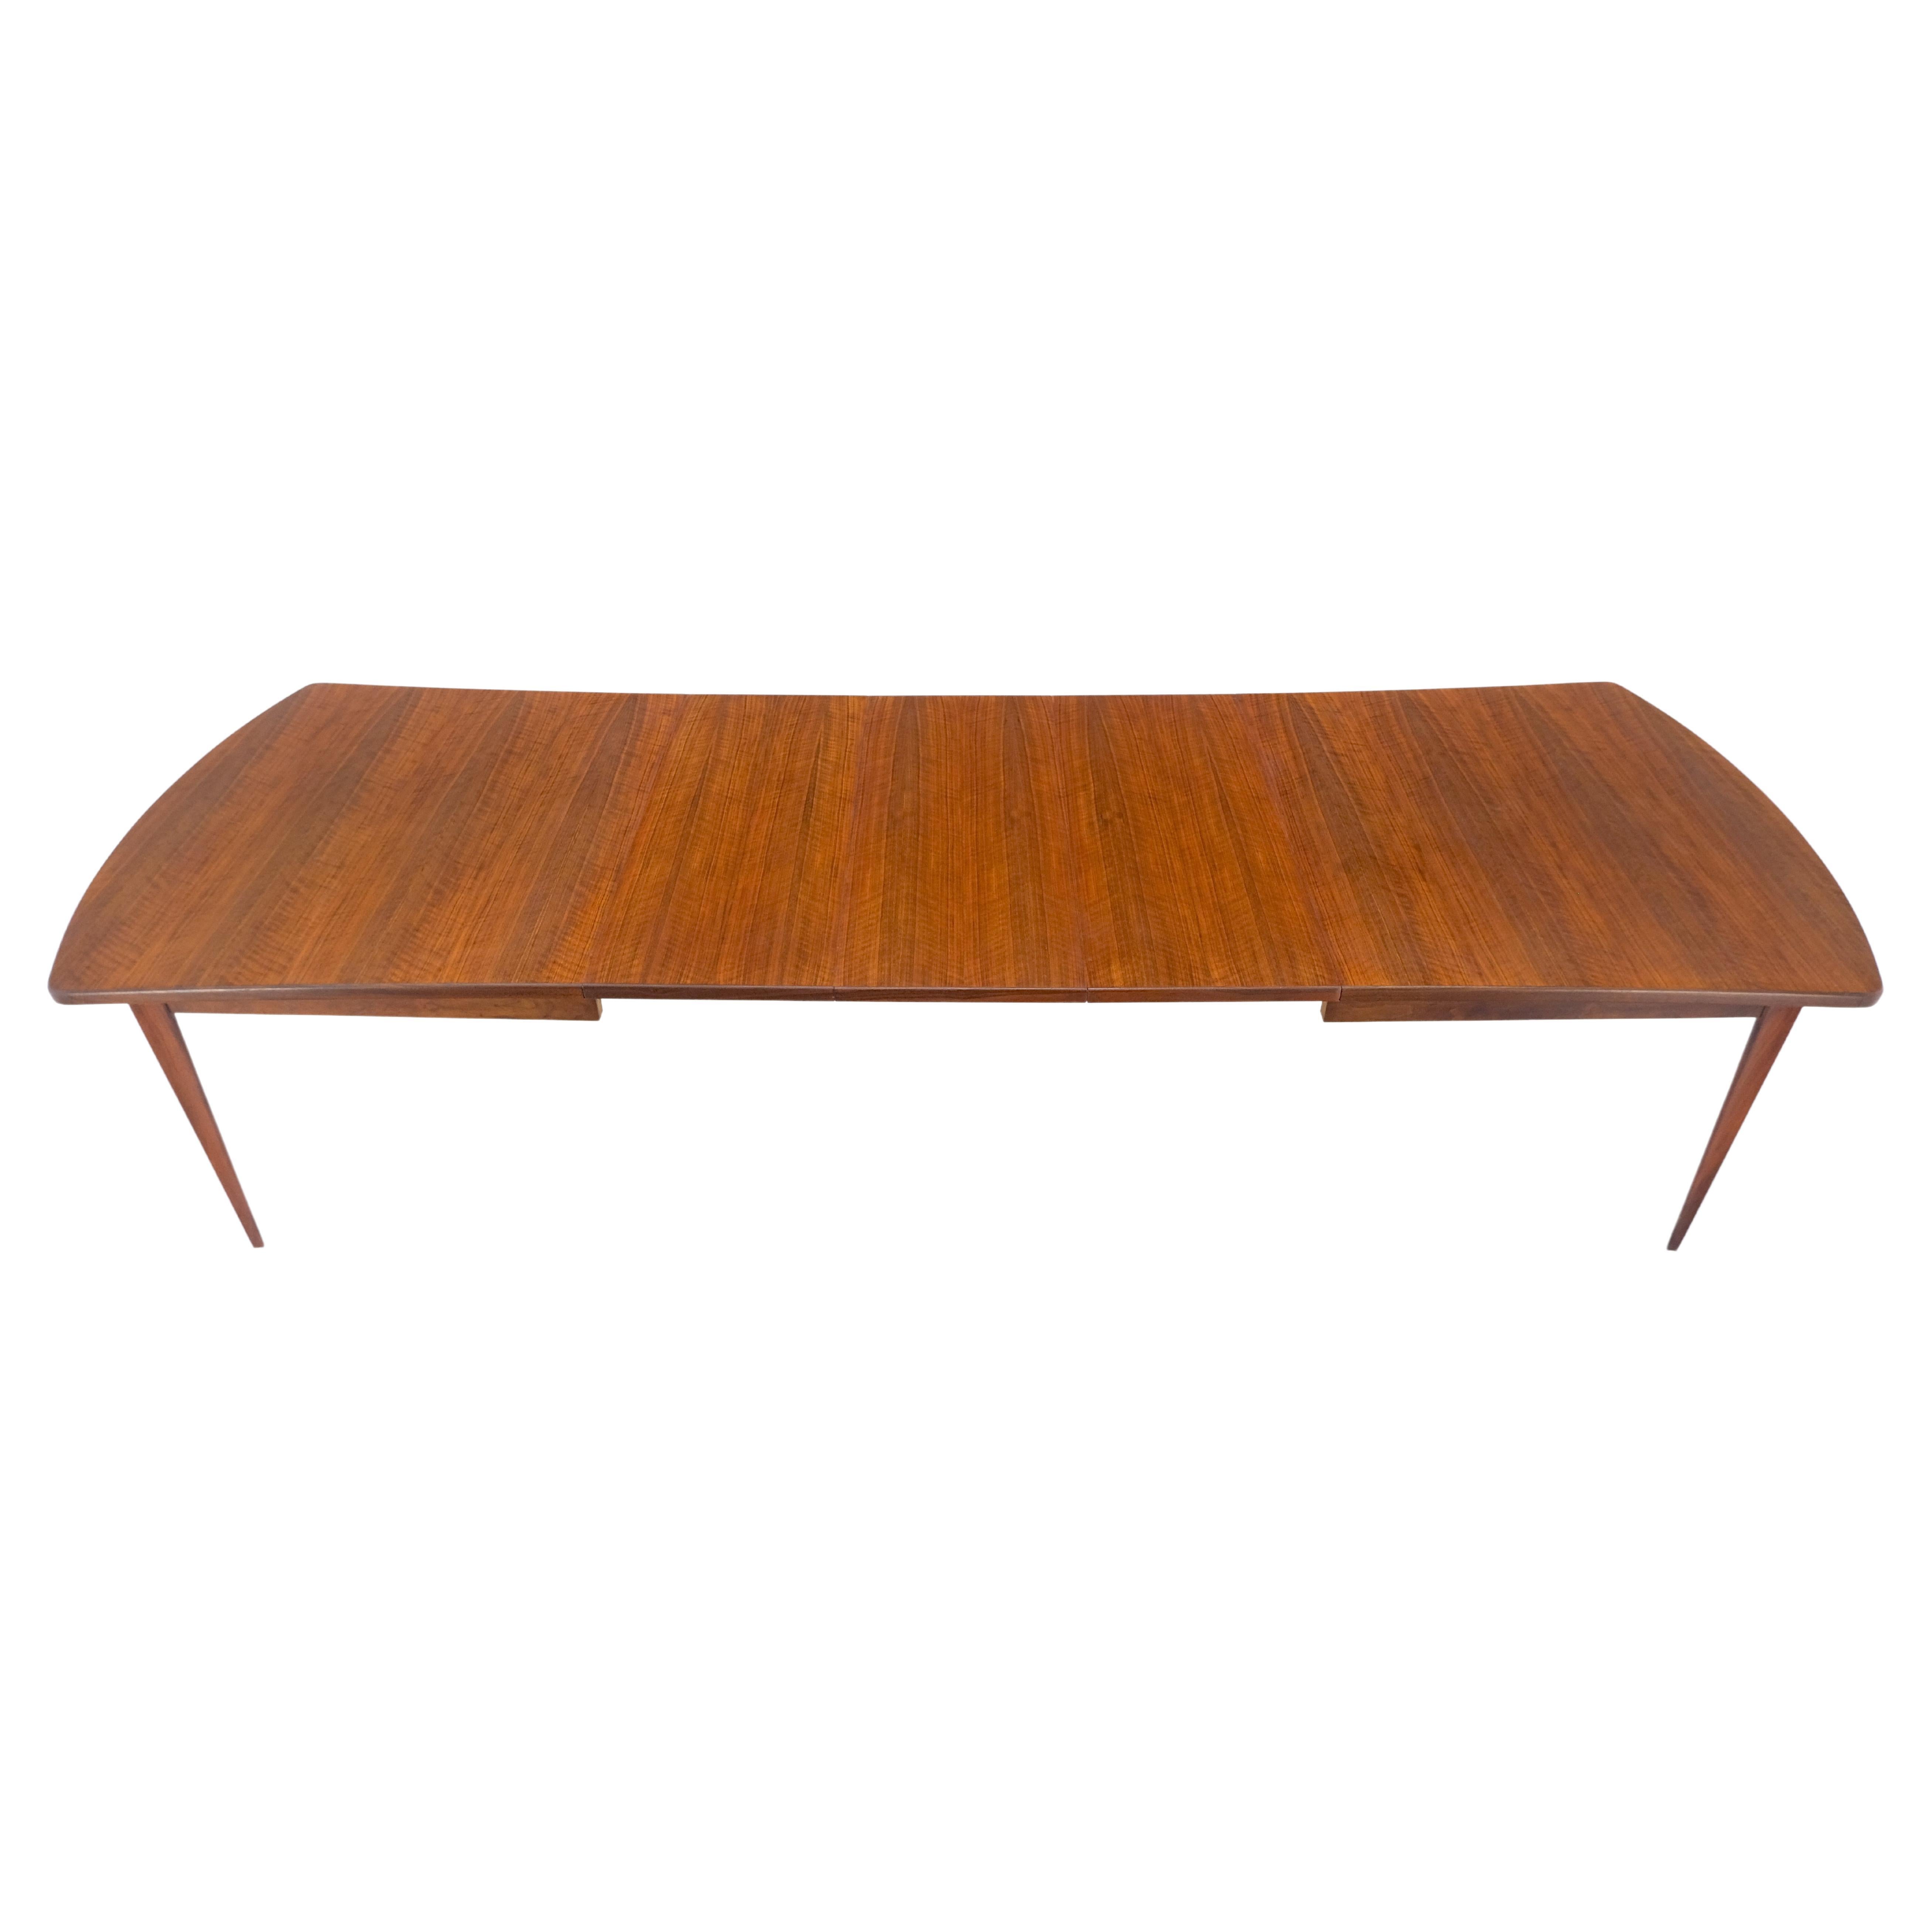 Concave Side Rounded Ends Form Large Oiled Walnut Dining Table 3 Leaves MINT!